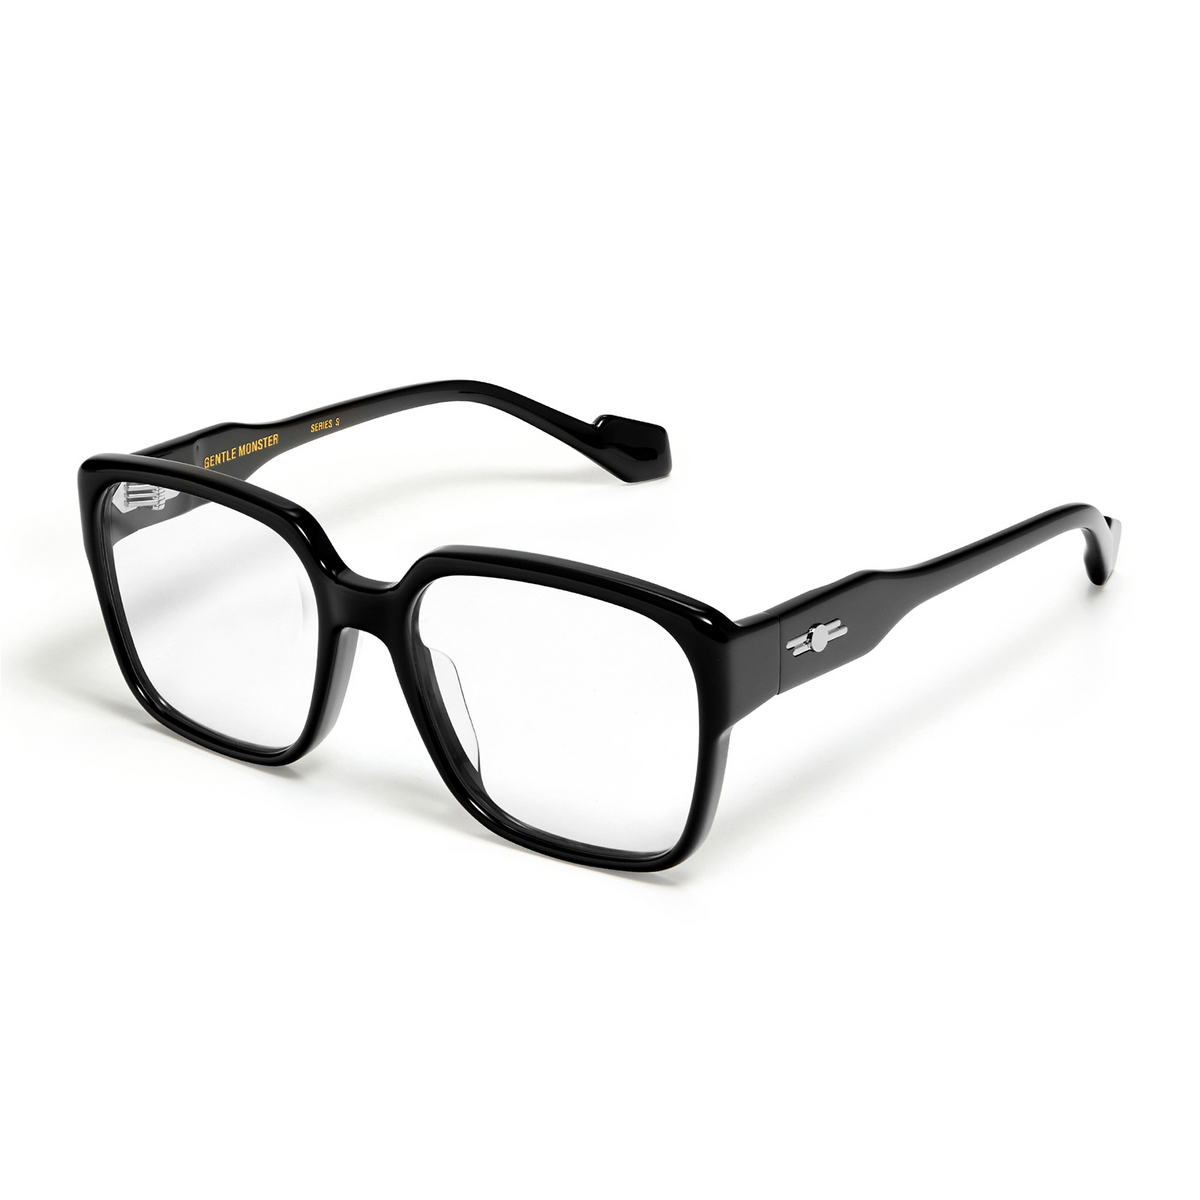 Gentle Monster® Square Eyeglasses: Loopy color Black 01 - three-quarters view.